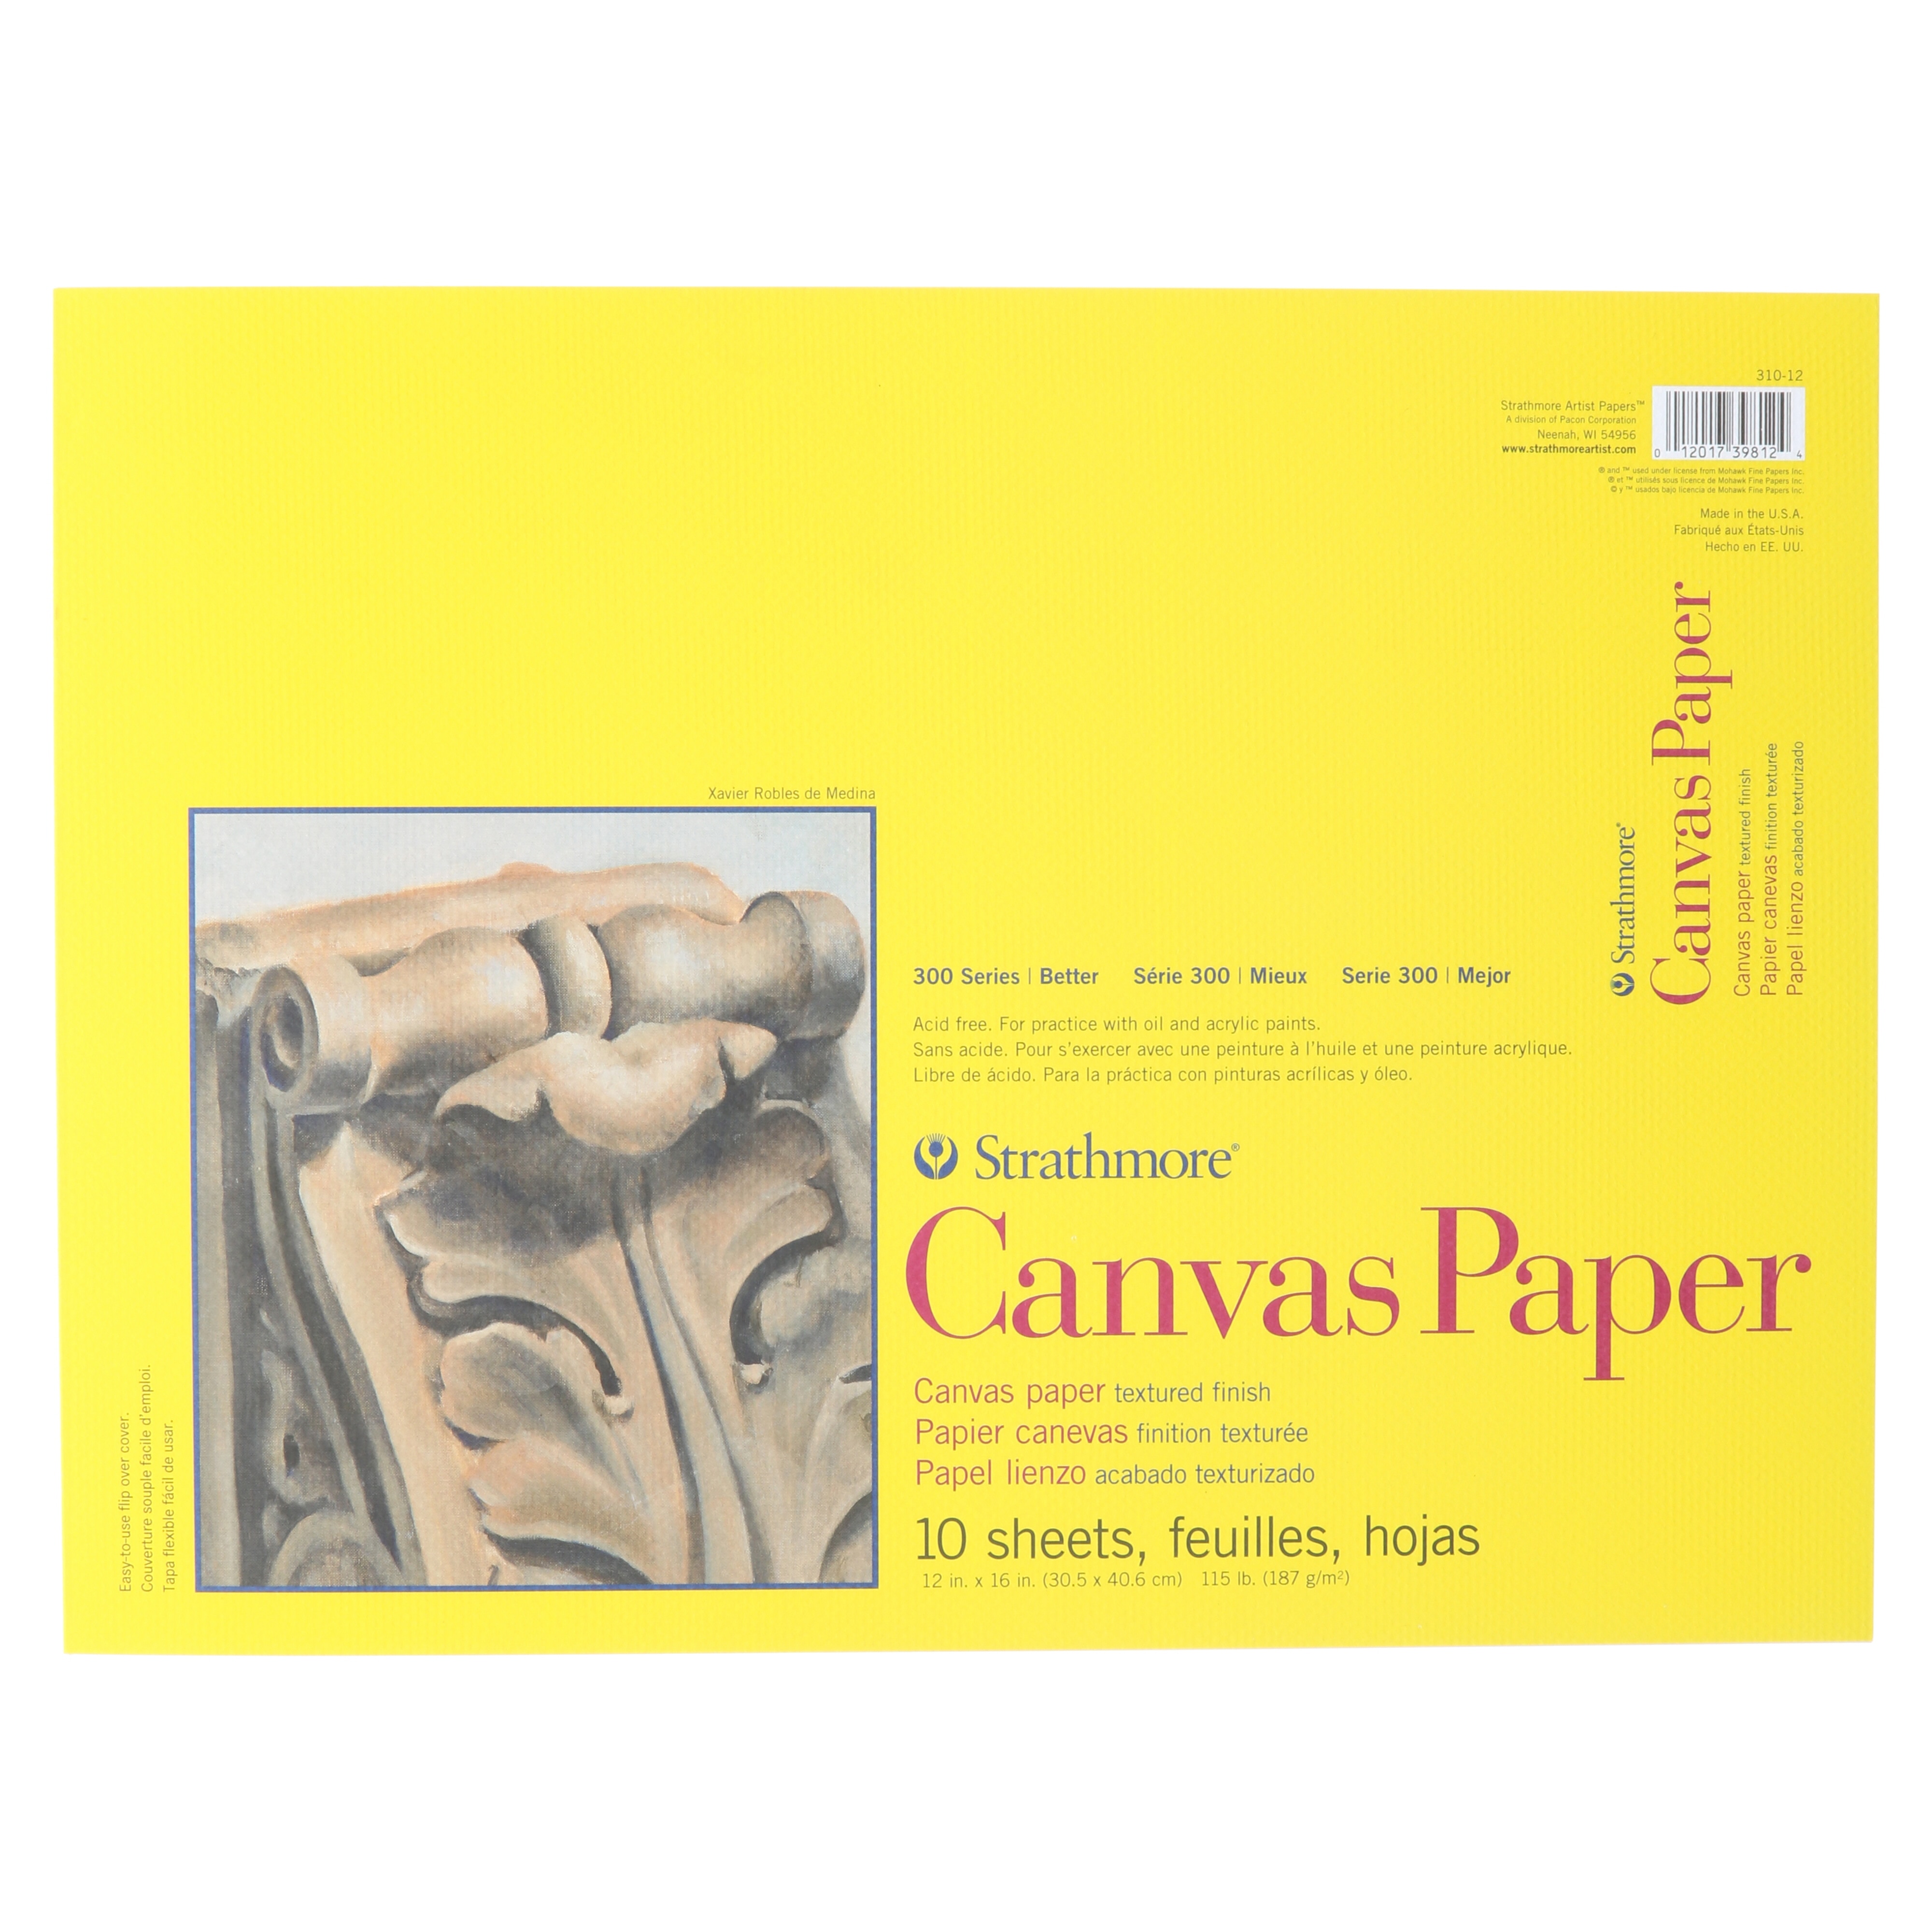 Strathmore Canvas Paper Pad, 300 Series, 12" x 16"